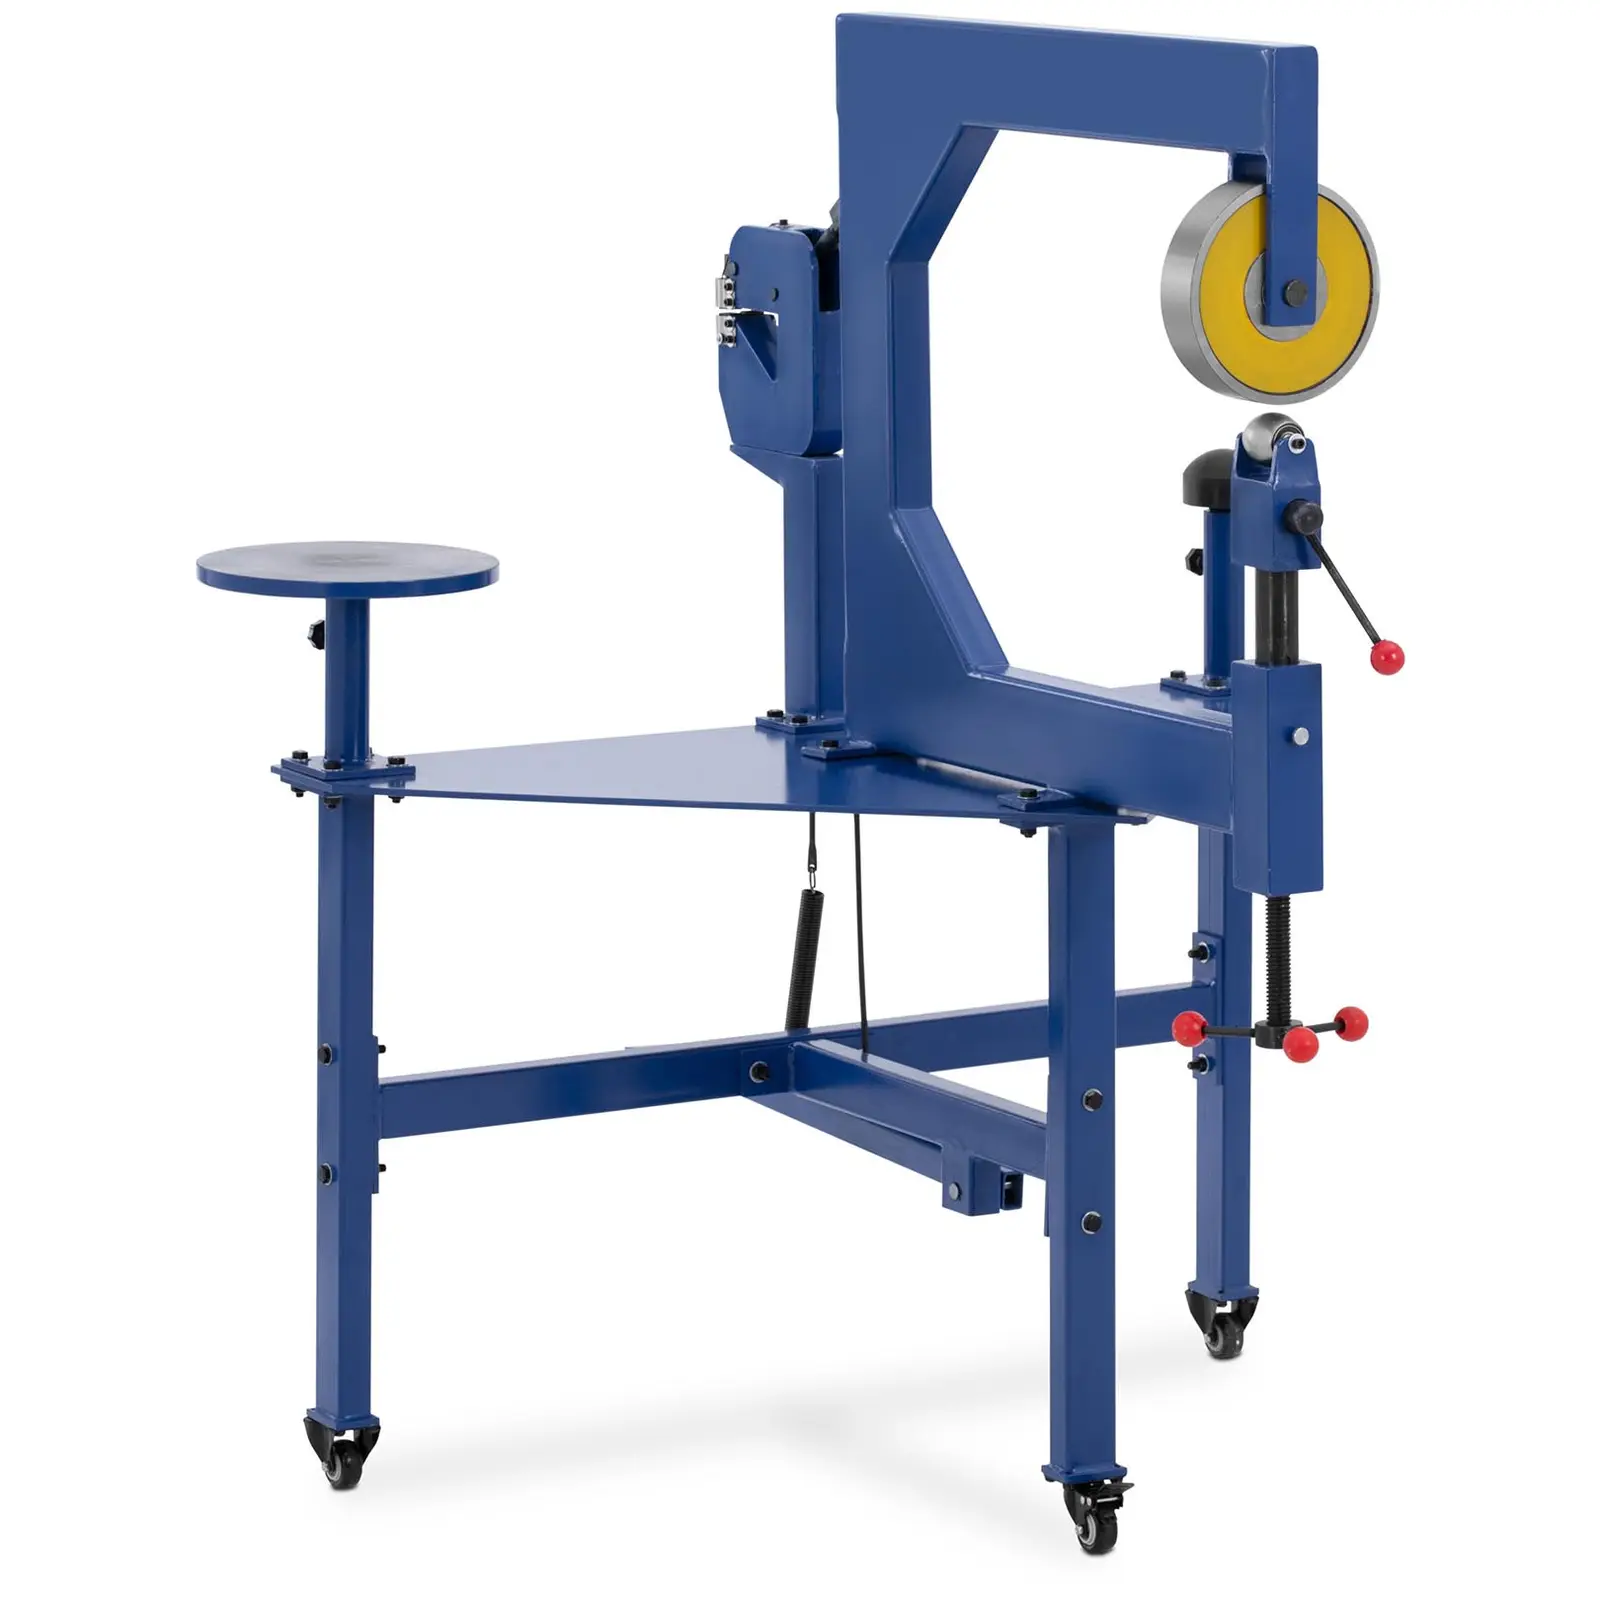 English wheel - 4-folding workstation - compressing and stretching device - sheets up to 1.5 mm